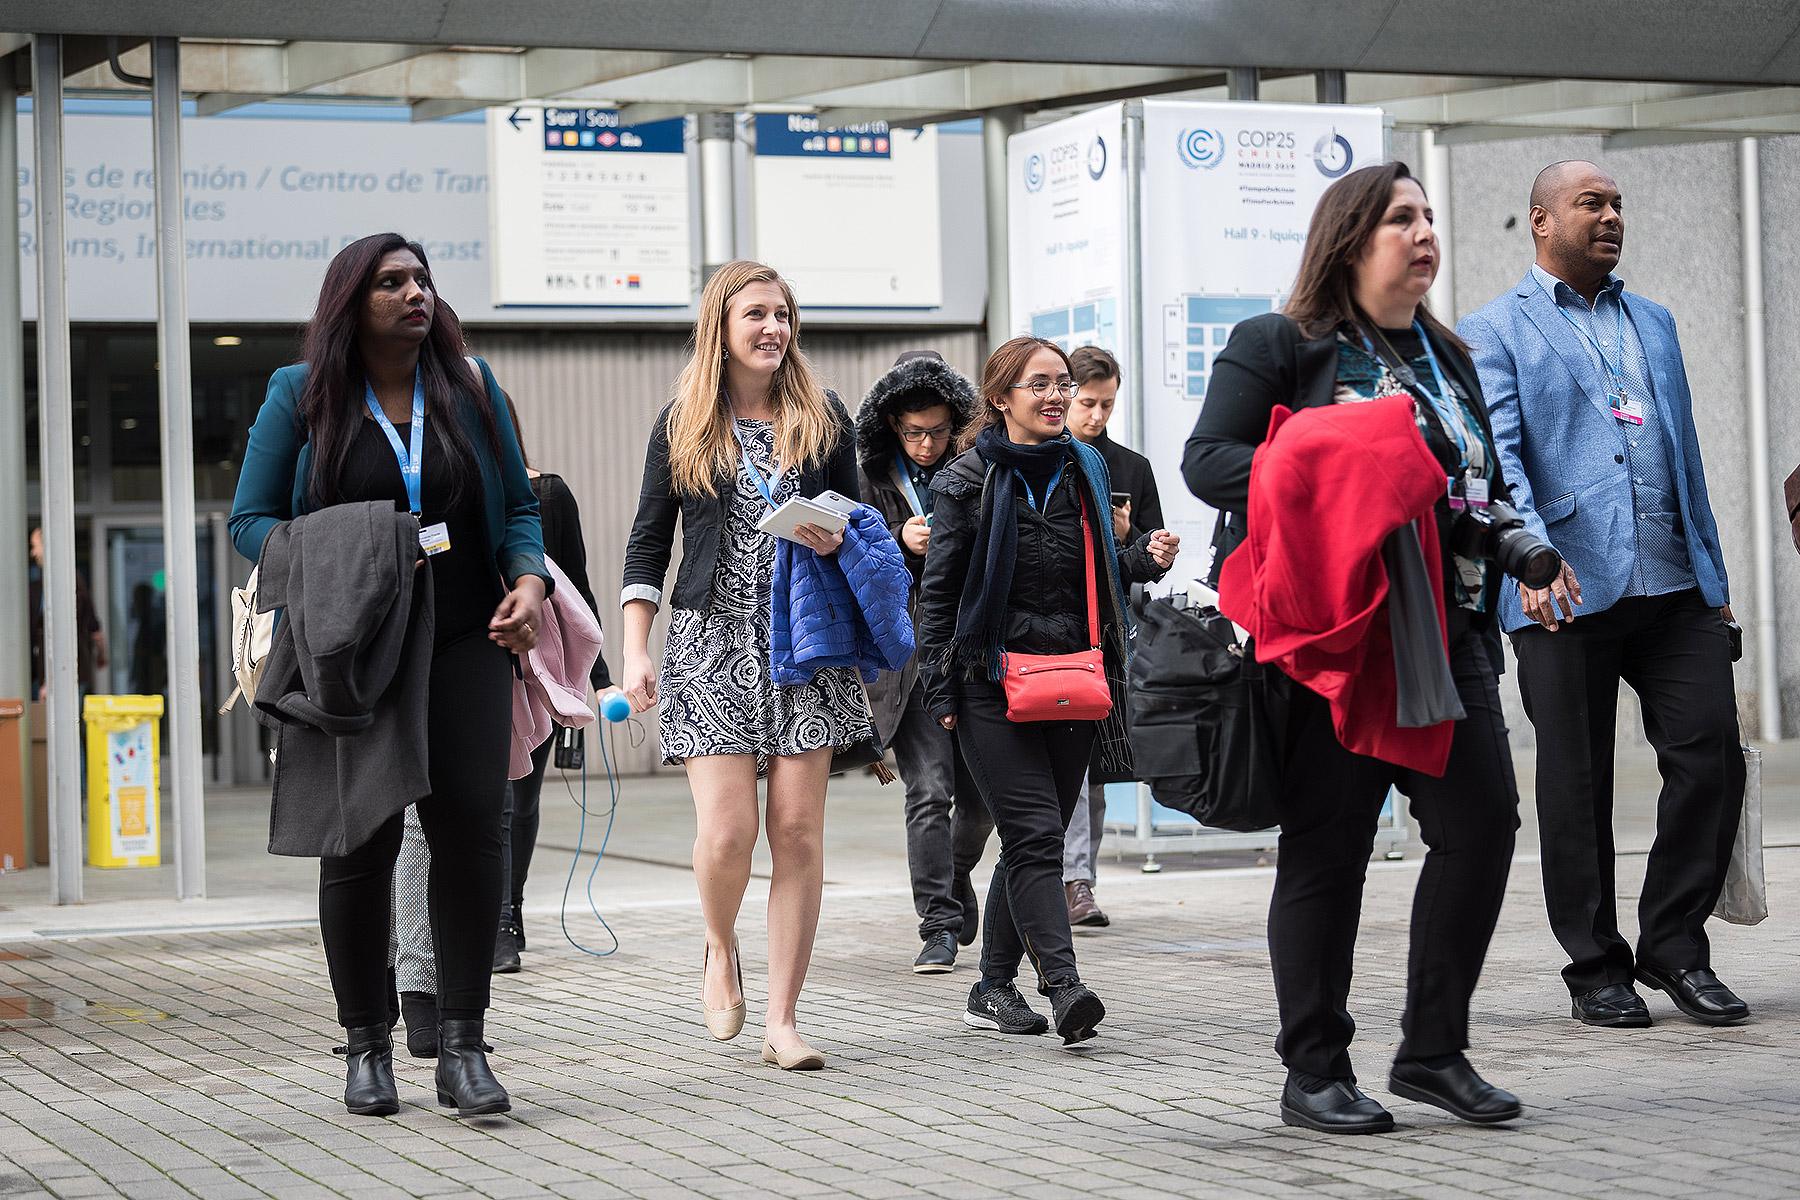 Lutheran World Federation delegates walk towards the plenary hall on day one of COP25 in Madrid. All photos: LWF/AlbinÂ HillertÂ 